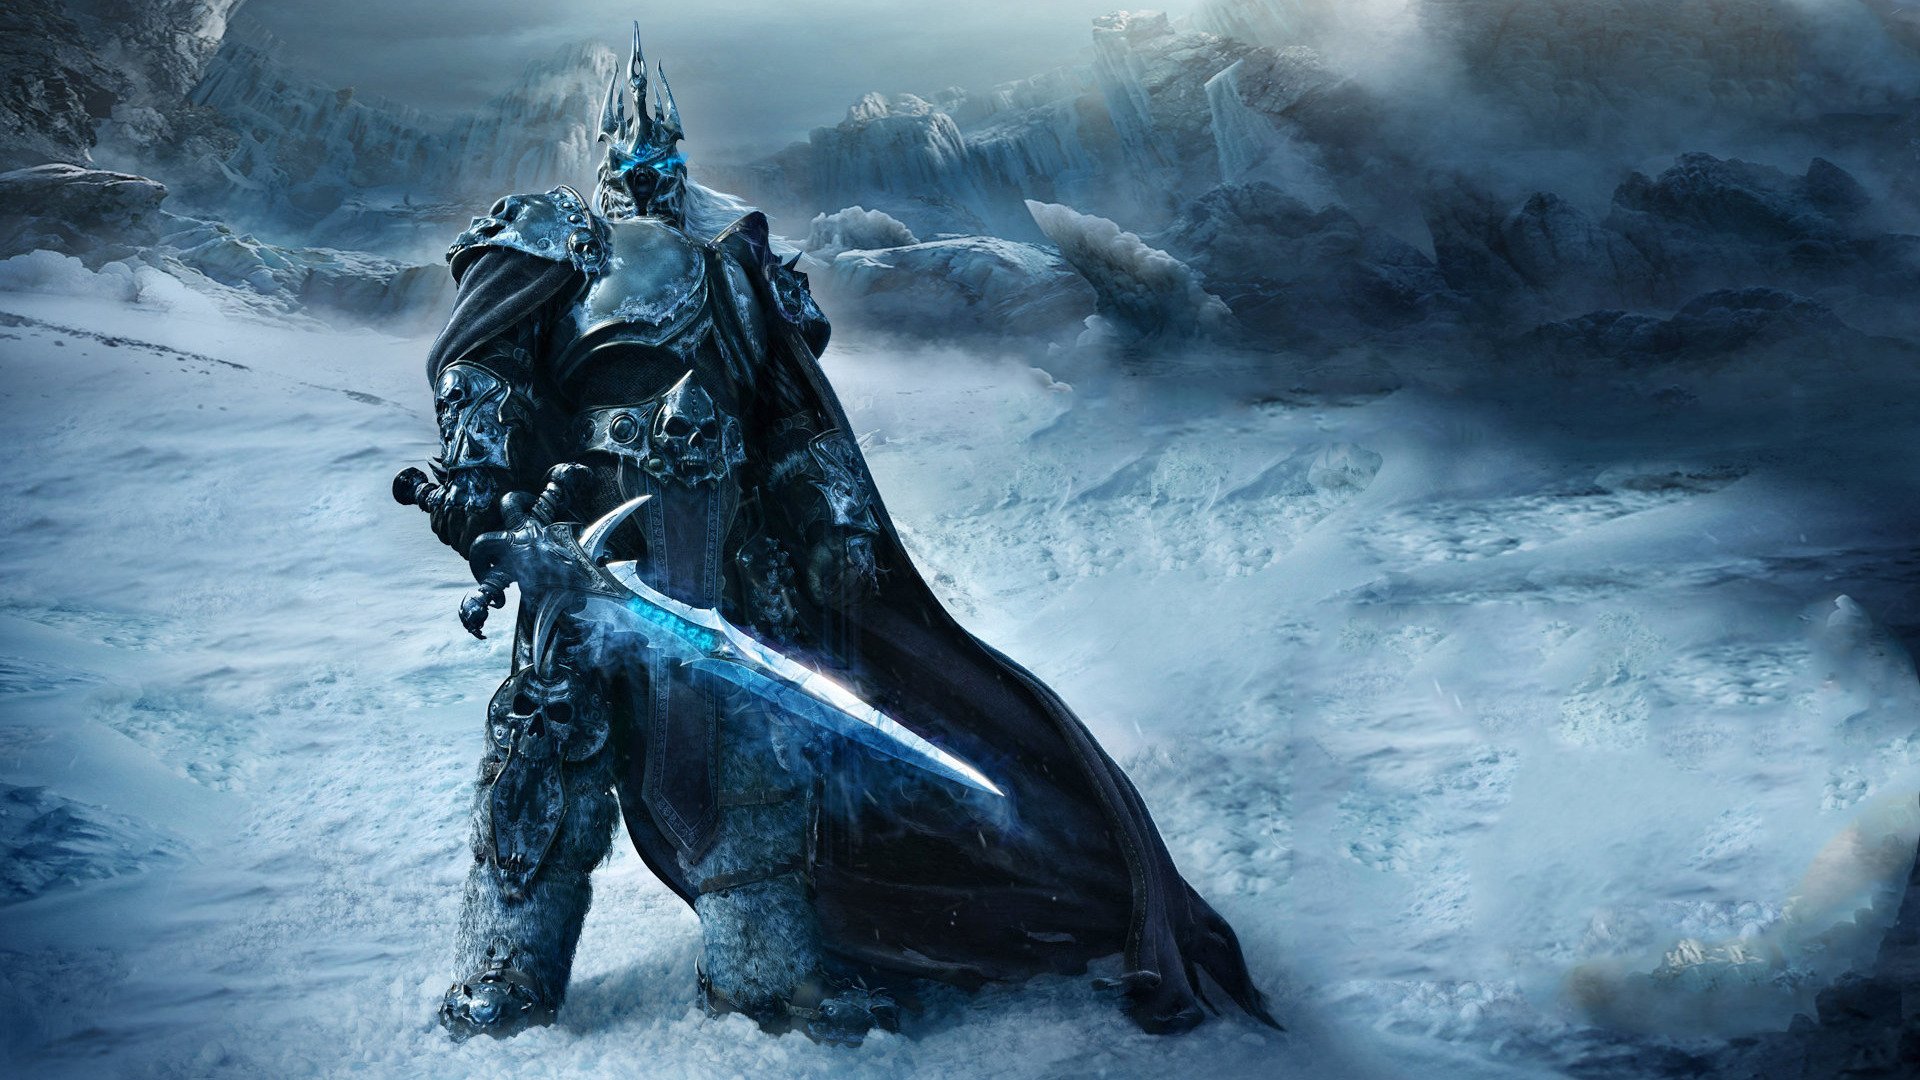 World of Warcraft Wrath of the Lich King Wallpapers HD Wallpapers 1920x1080